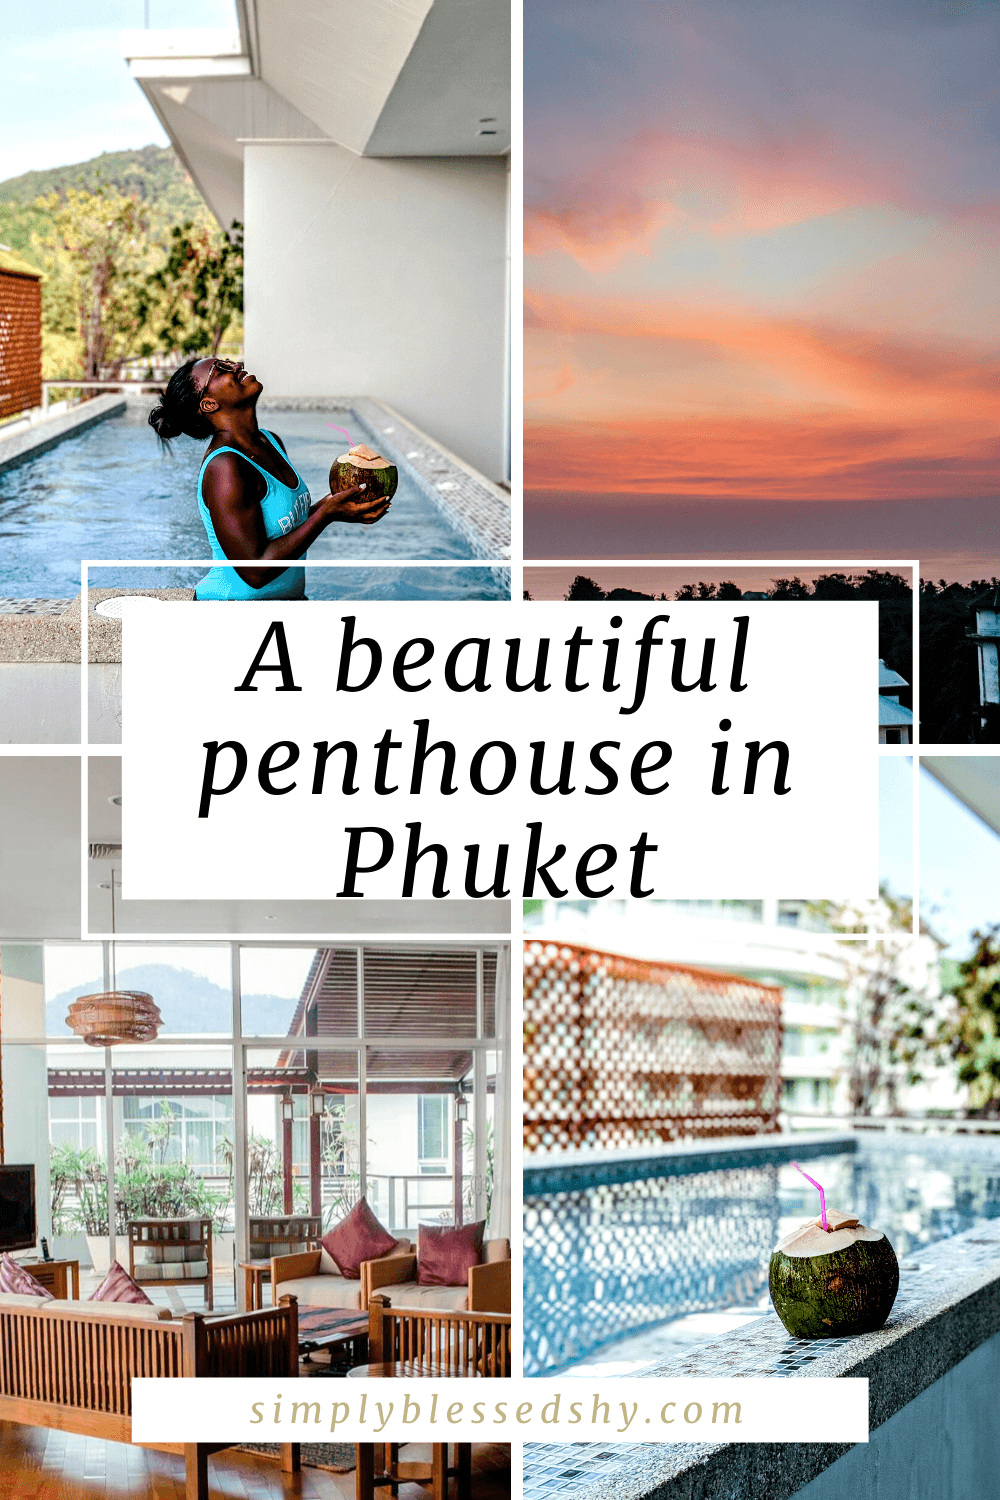 Staying in a penthouse in Phuket, Thailand